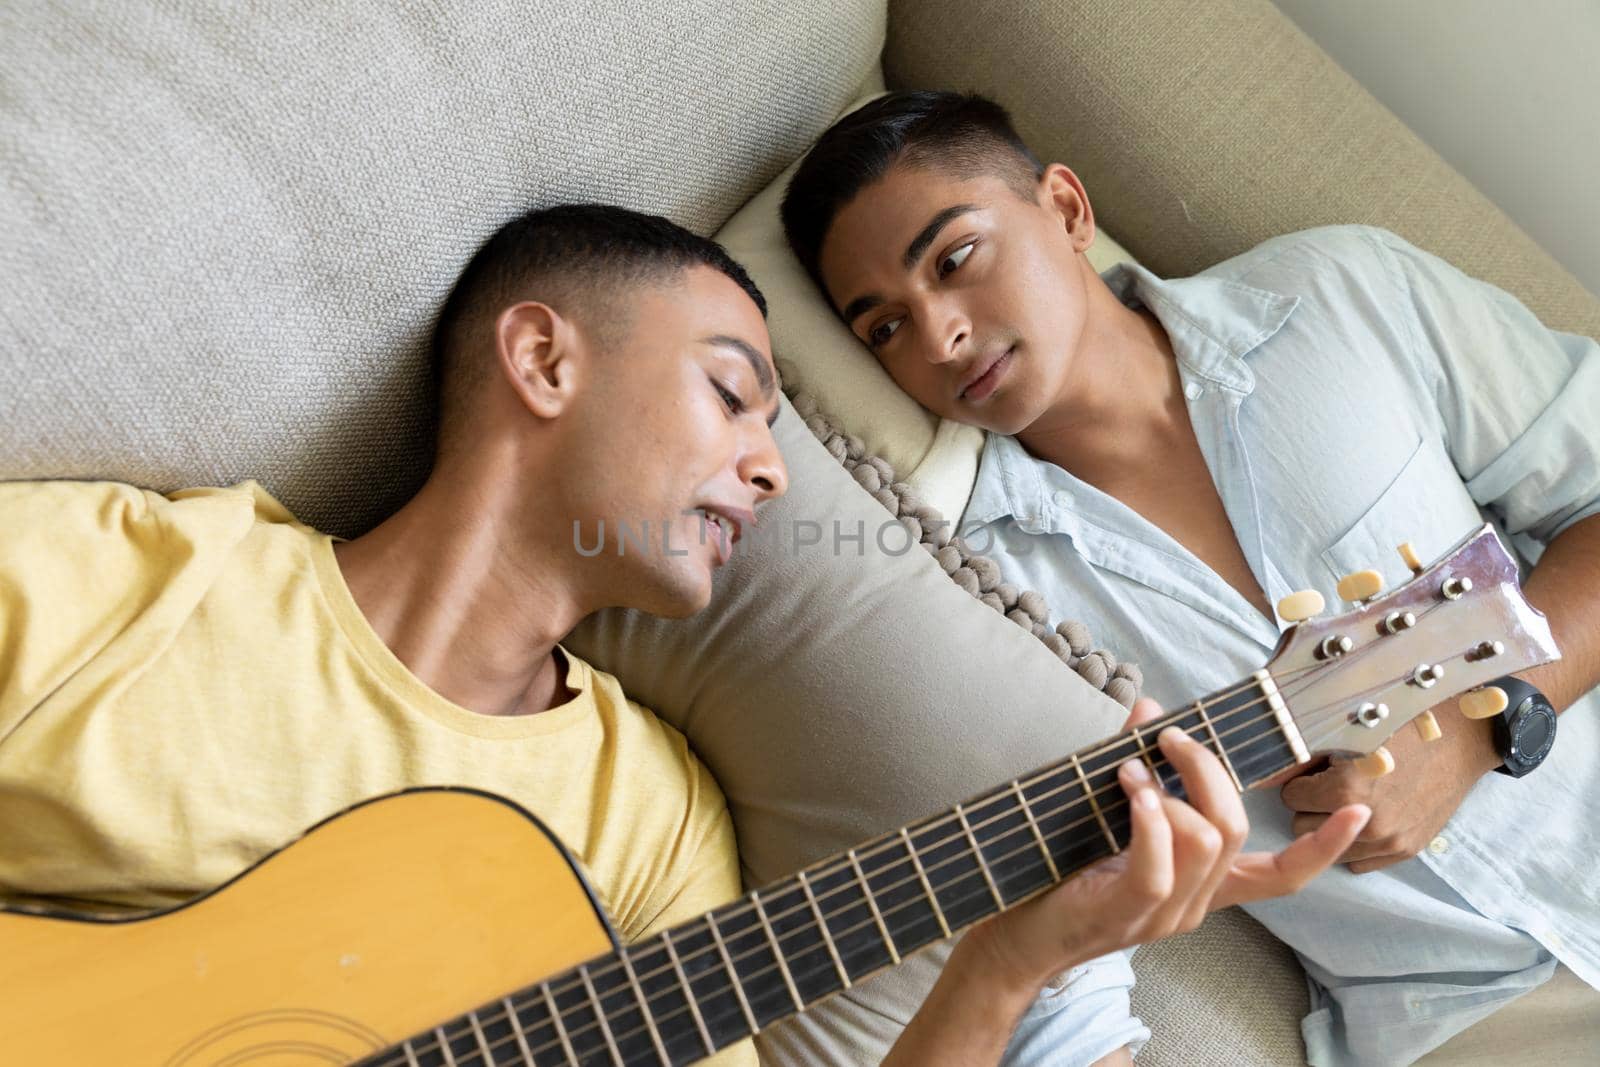 Diverse gay male couple lying on sofa playing guitar. staying at home in isolation during quarantine lockdown.